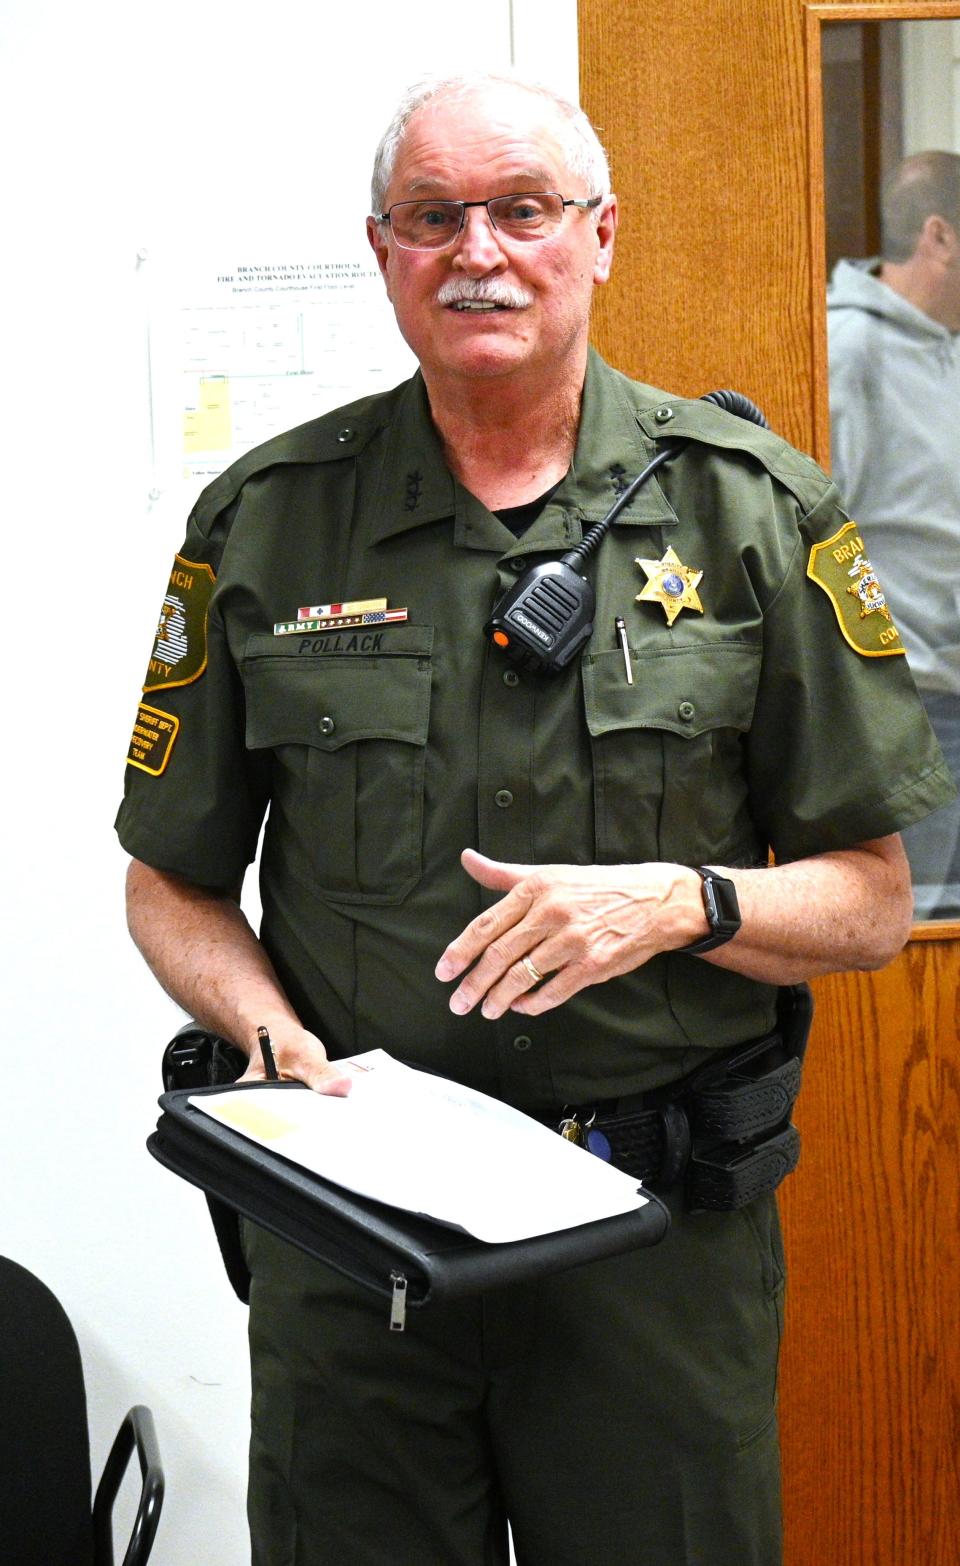 Sheriff John Pollack shows off the new green patrol uniforms now being phased in for new deputies.